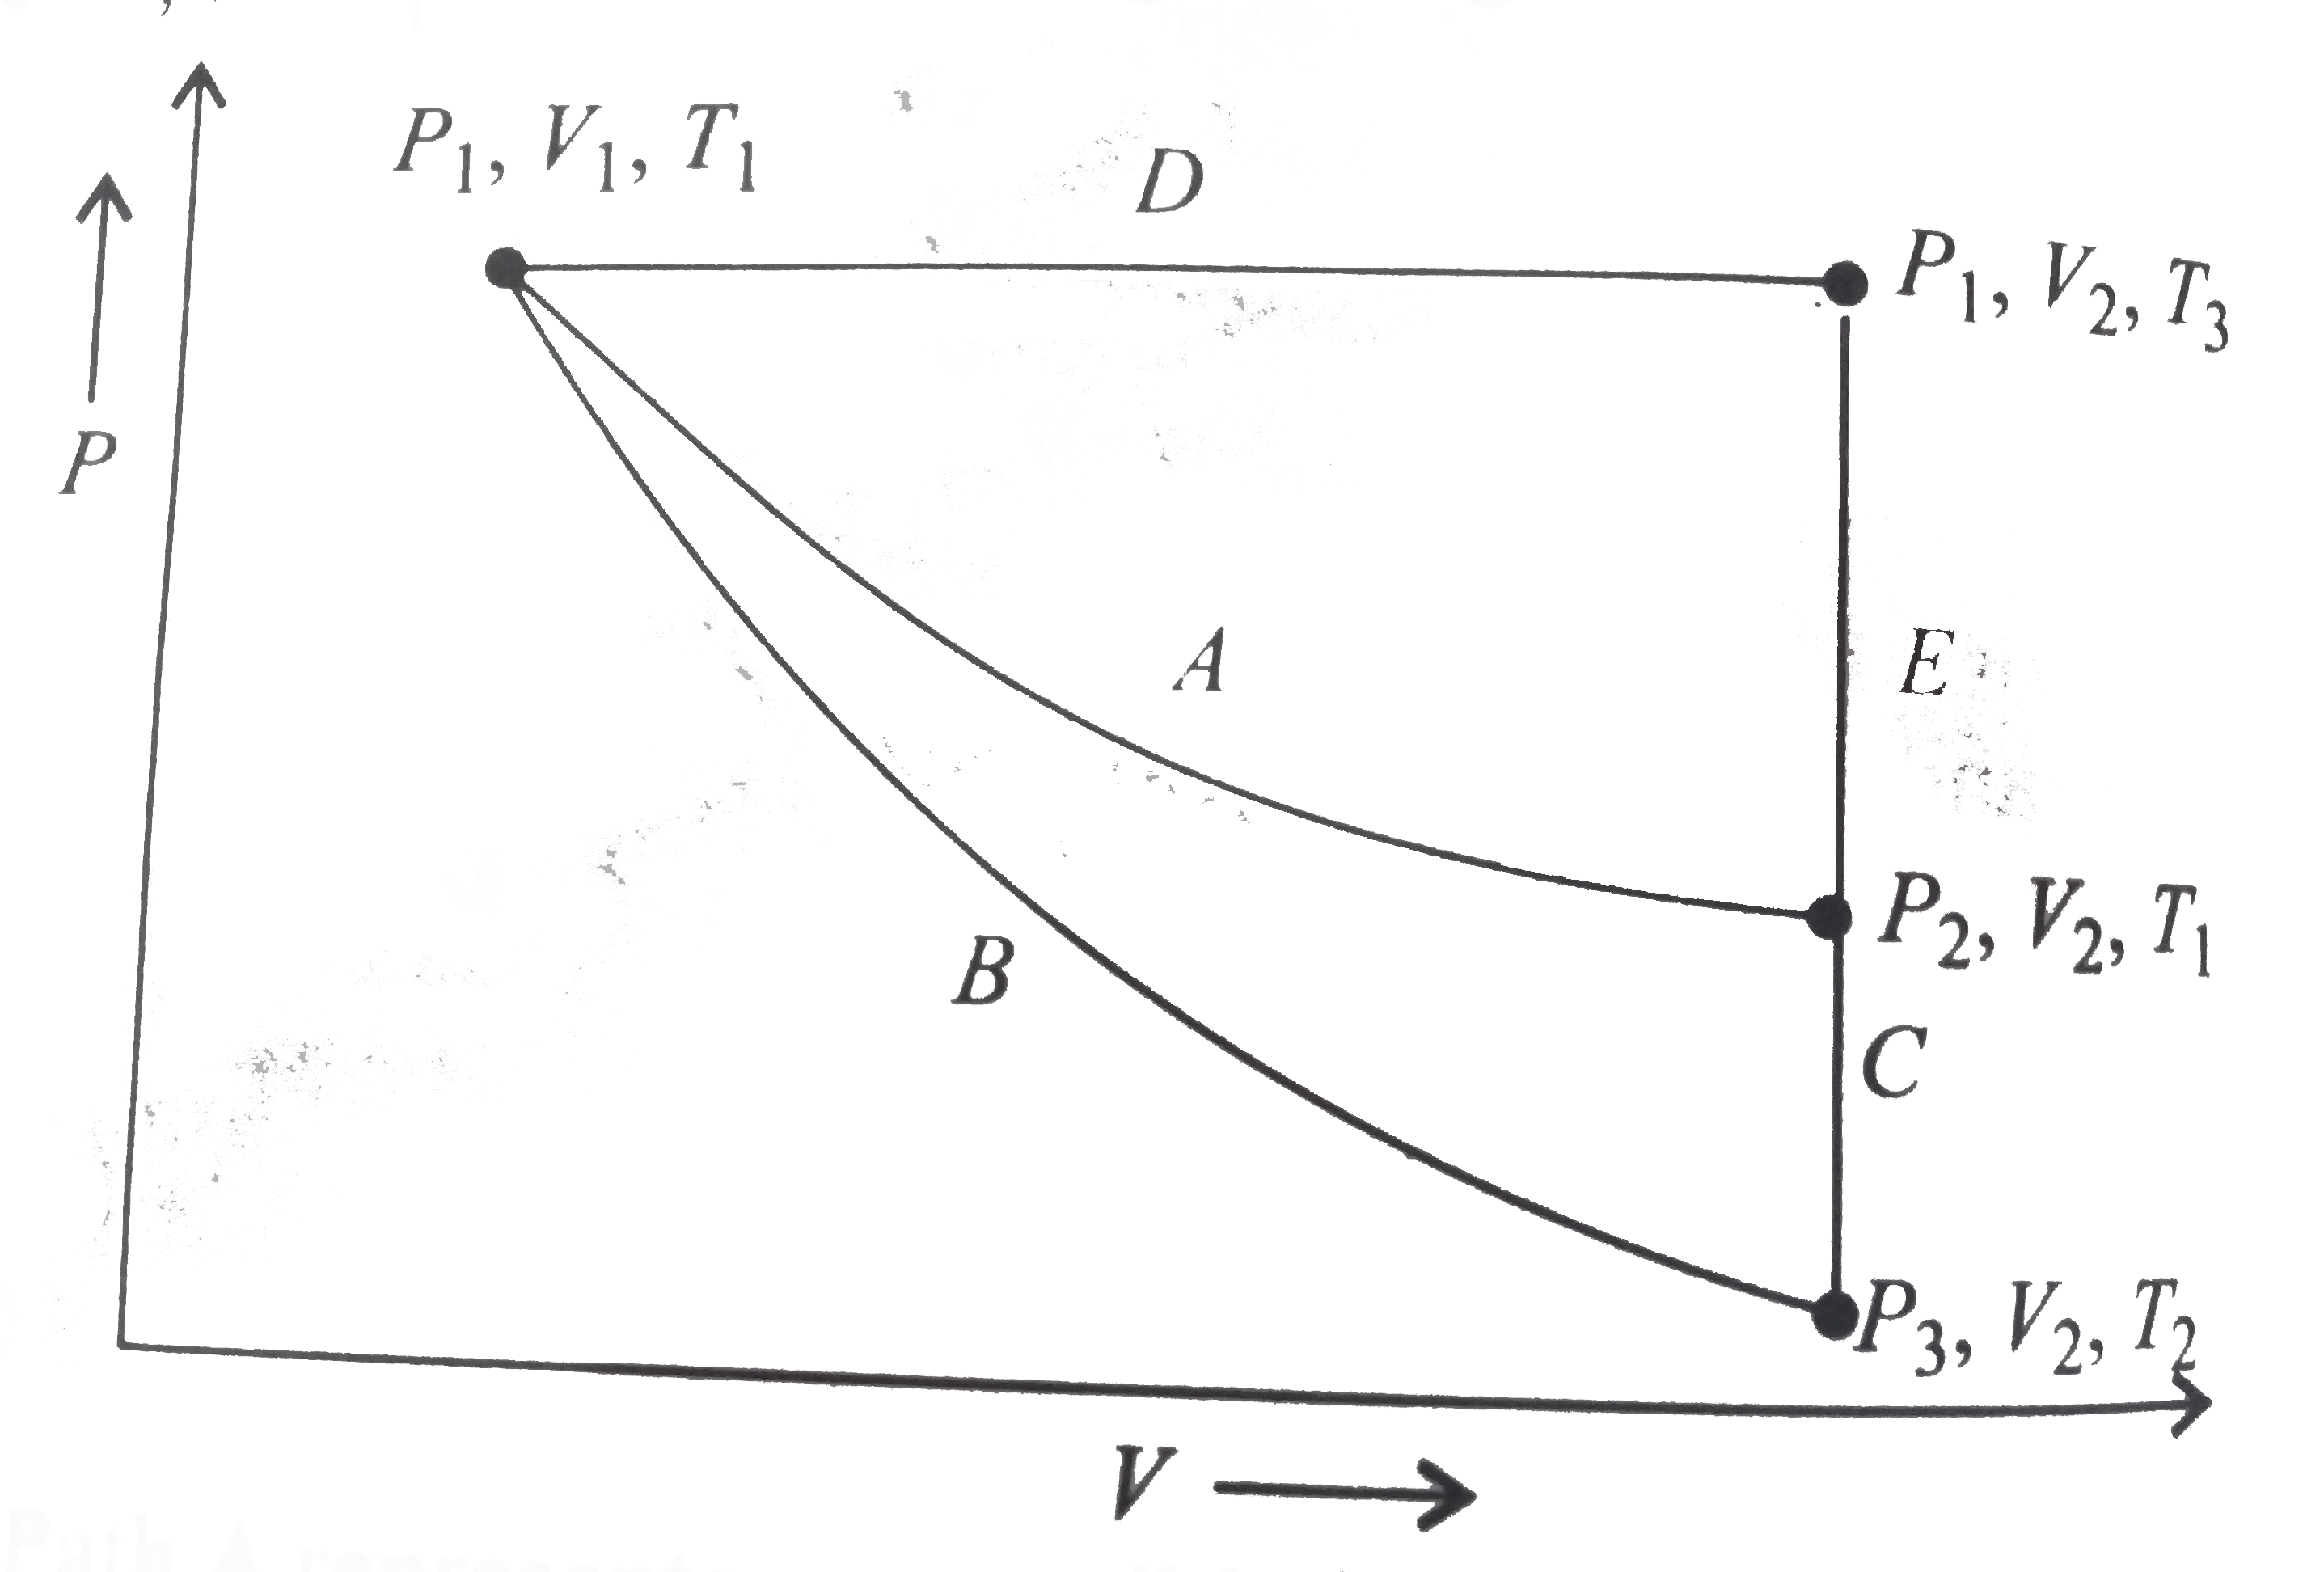 For an ideal gas, an illustratio of three different paths A(B+C) and (D+E) from an initial state P(1), V(1), T(1) to a final state P(2), V(2),T(1) is shown in the given figure.      Path Arepresents a reversible isothermal expansion form P(1),V(1) to P(2),V(2), Path (B+C) represents a reversible adiabatic expansion (B) from P(1),V(1),T(1)to P(3),V(2),T(2) followed by reversible heating the gas at constant volume (C)from P(3),V(2),T(2) to P(2),V(2),T(1). Path (D+E) represents a reversible expansion at constant pressure P(1)(D) from P(1),V(1),T(1) to P(1),V(2),T(3) followed  by a reversible cooling at constant volume V(2)(E) from P(1),V(2),T(3) to P(2),V(2),T(1).   What is q(rev), for path (B +C)?